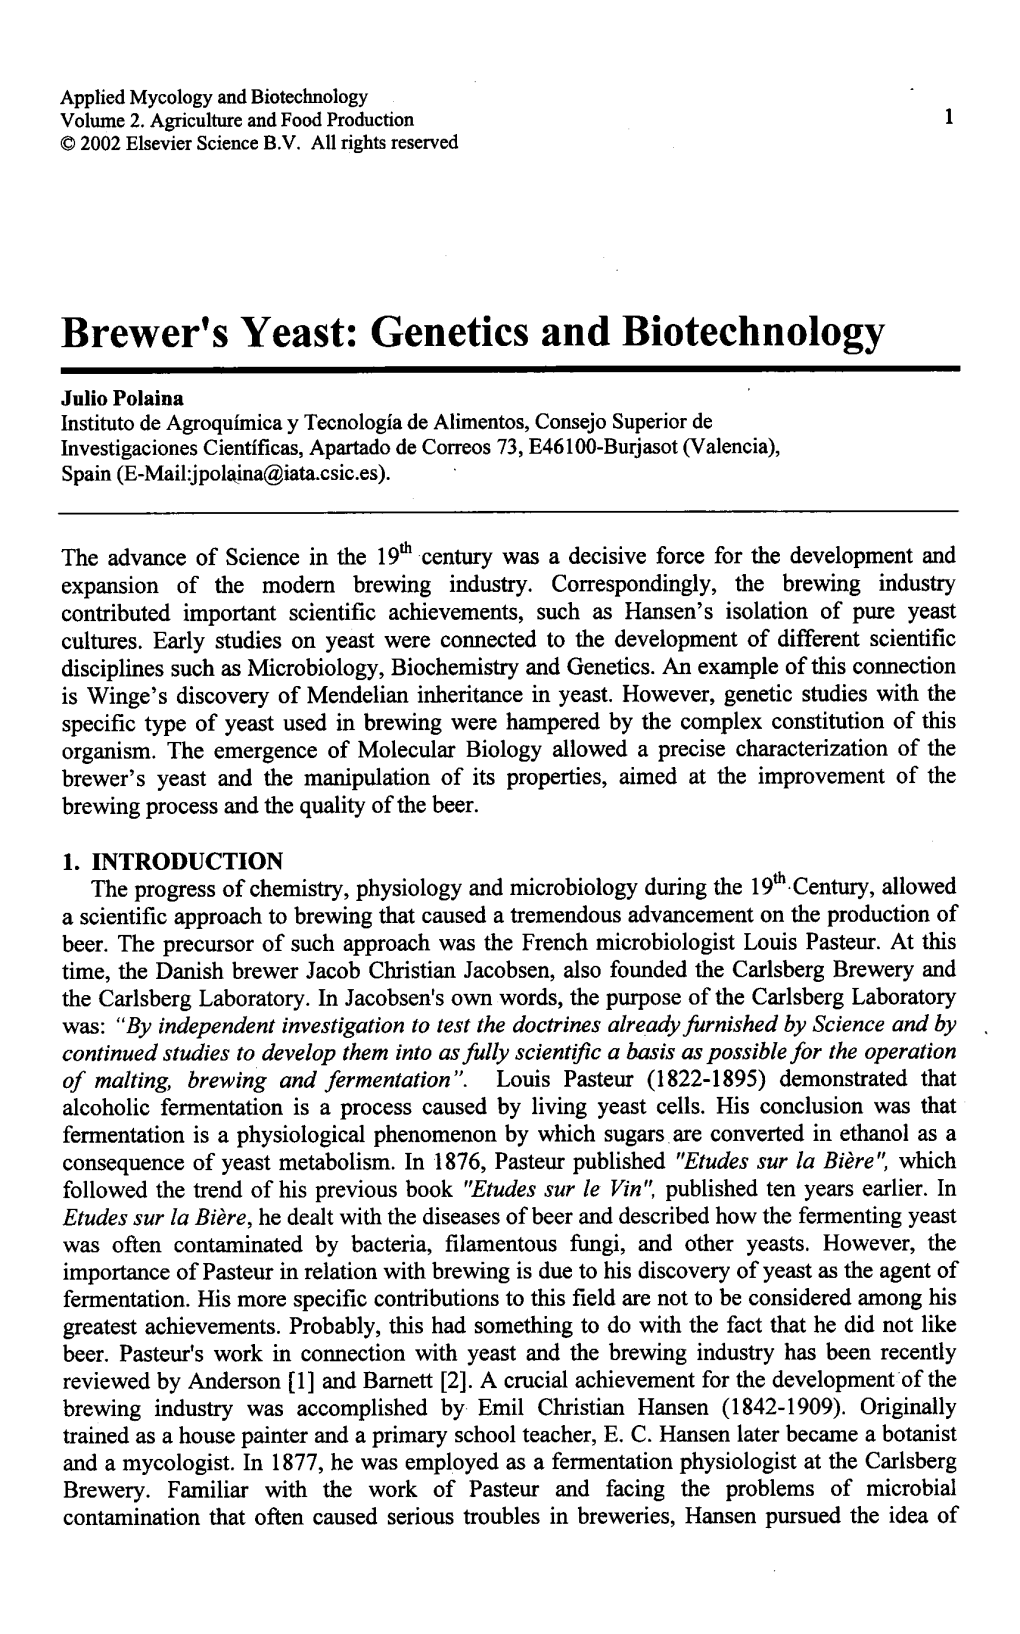 Brewer's Yeast: Genetics and Biotechnology